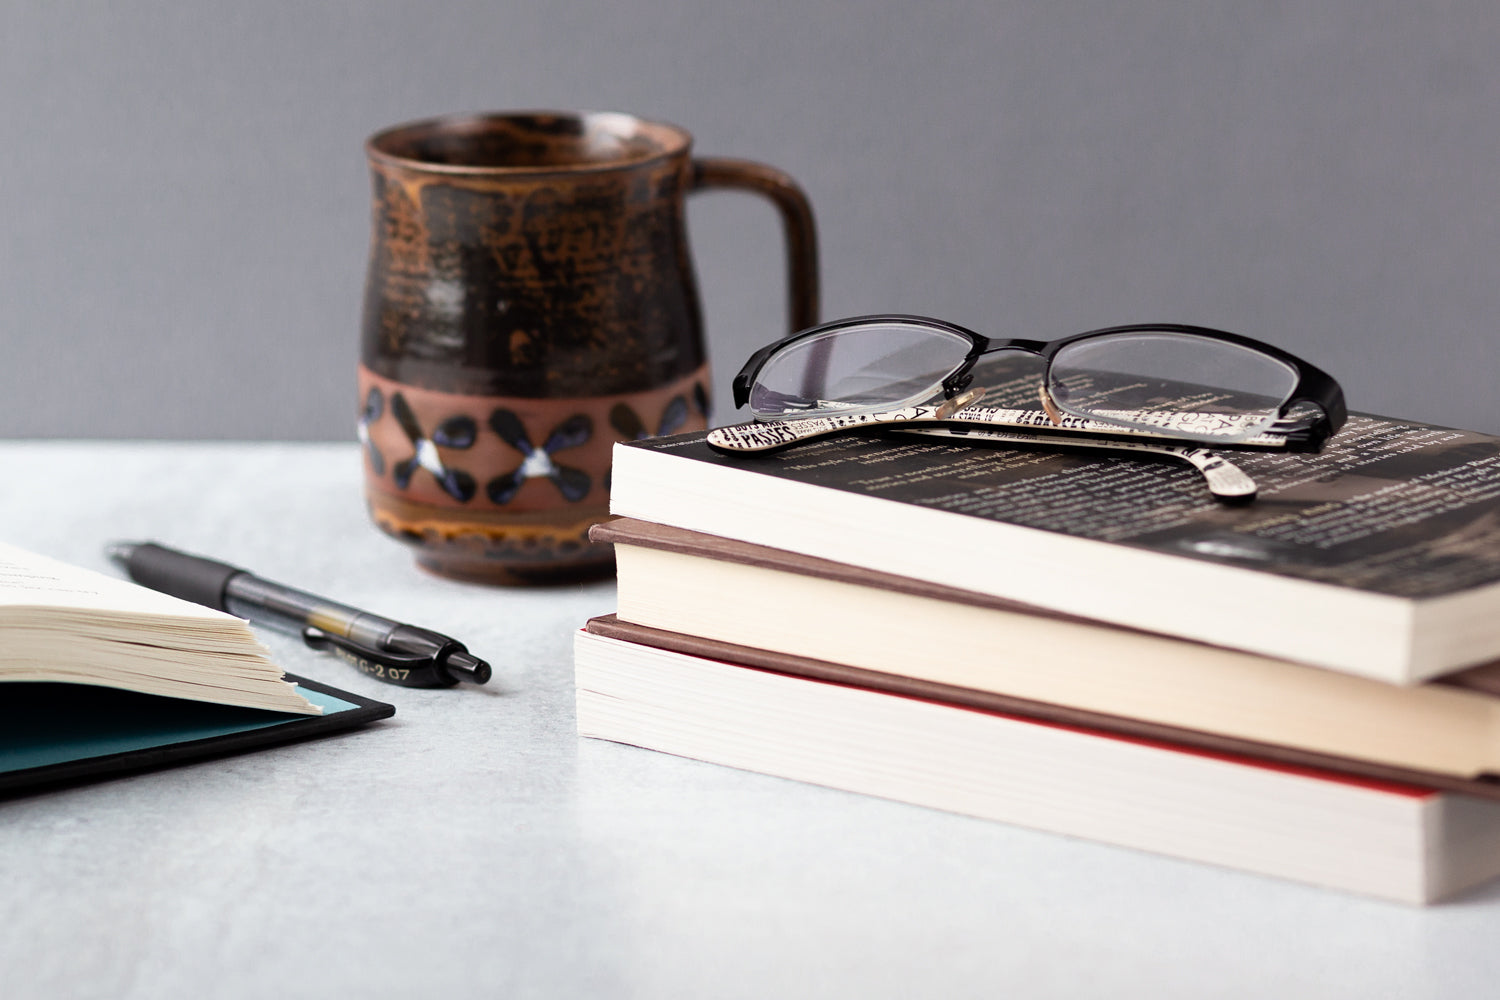 A stack of books sits on a white desk next to a pen and a unique coffee mug.